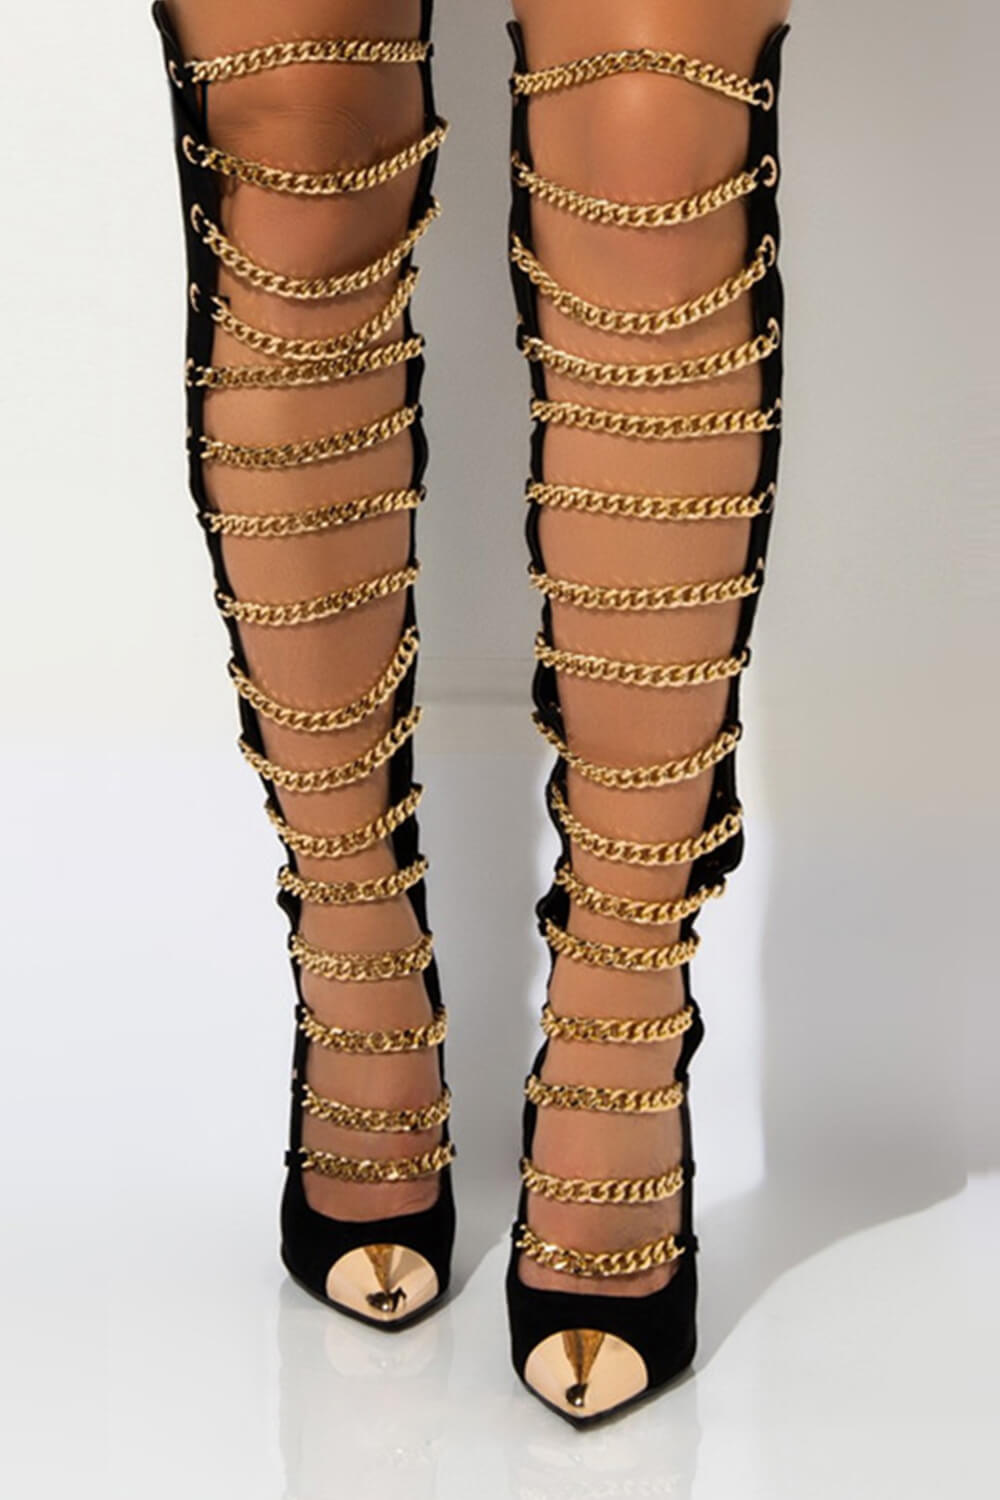 Gold Chain Pointed Toe Knee High Stiletto Boots - Black